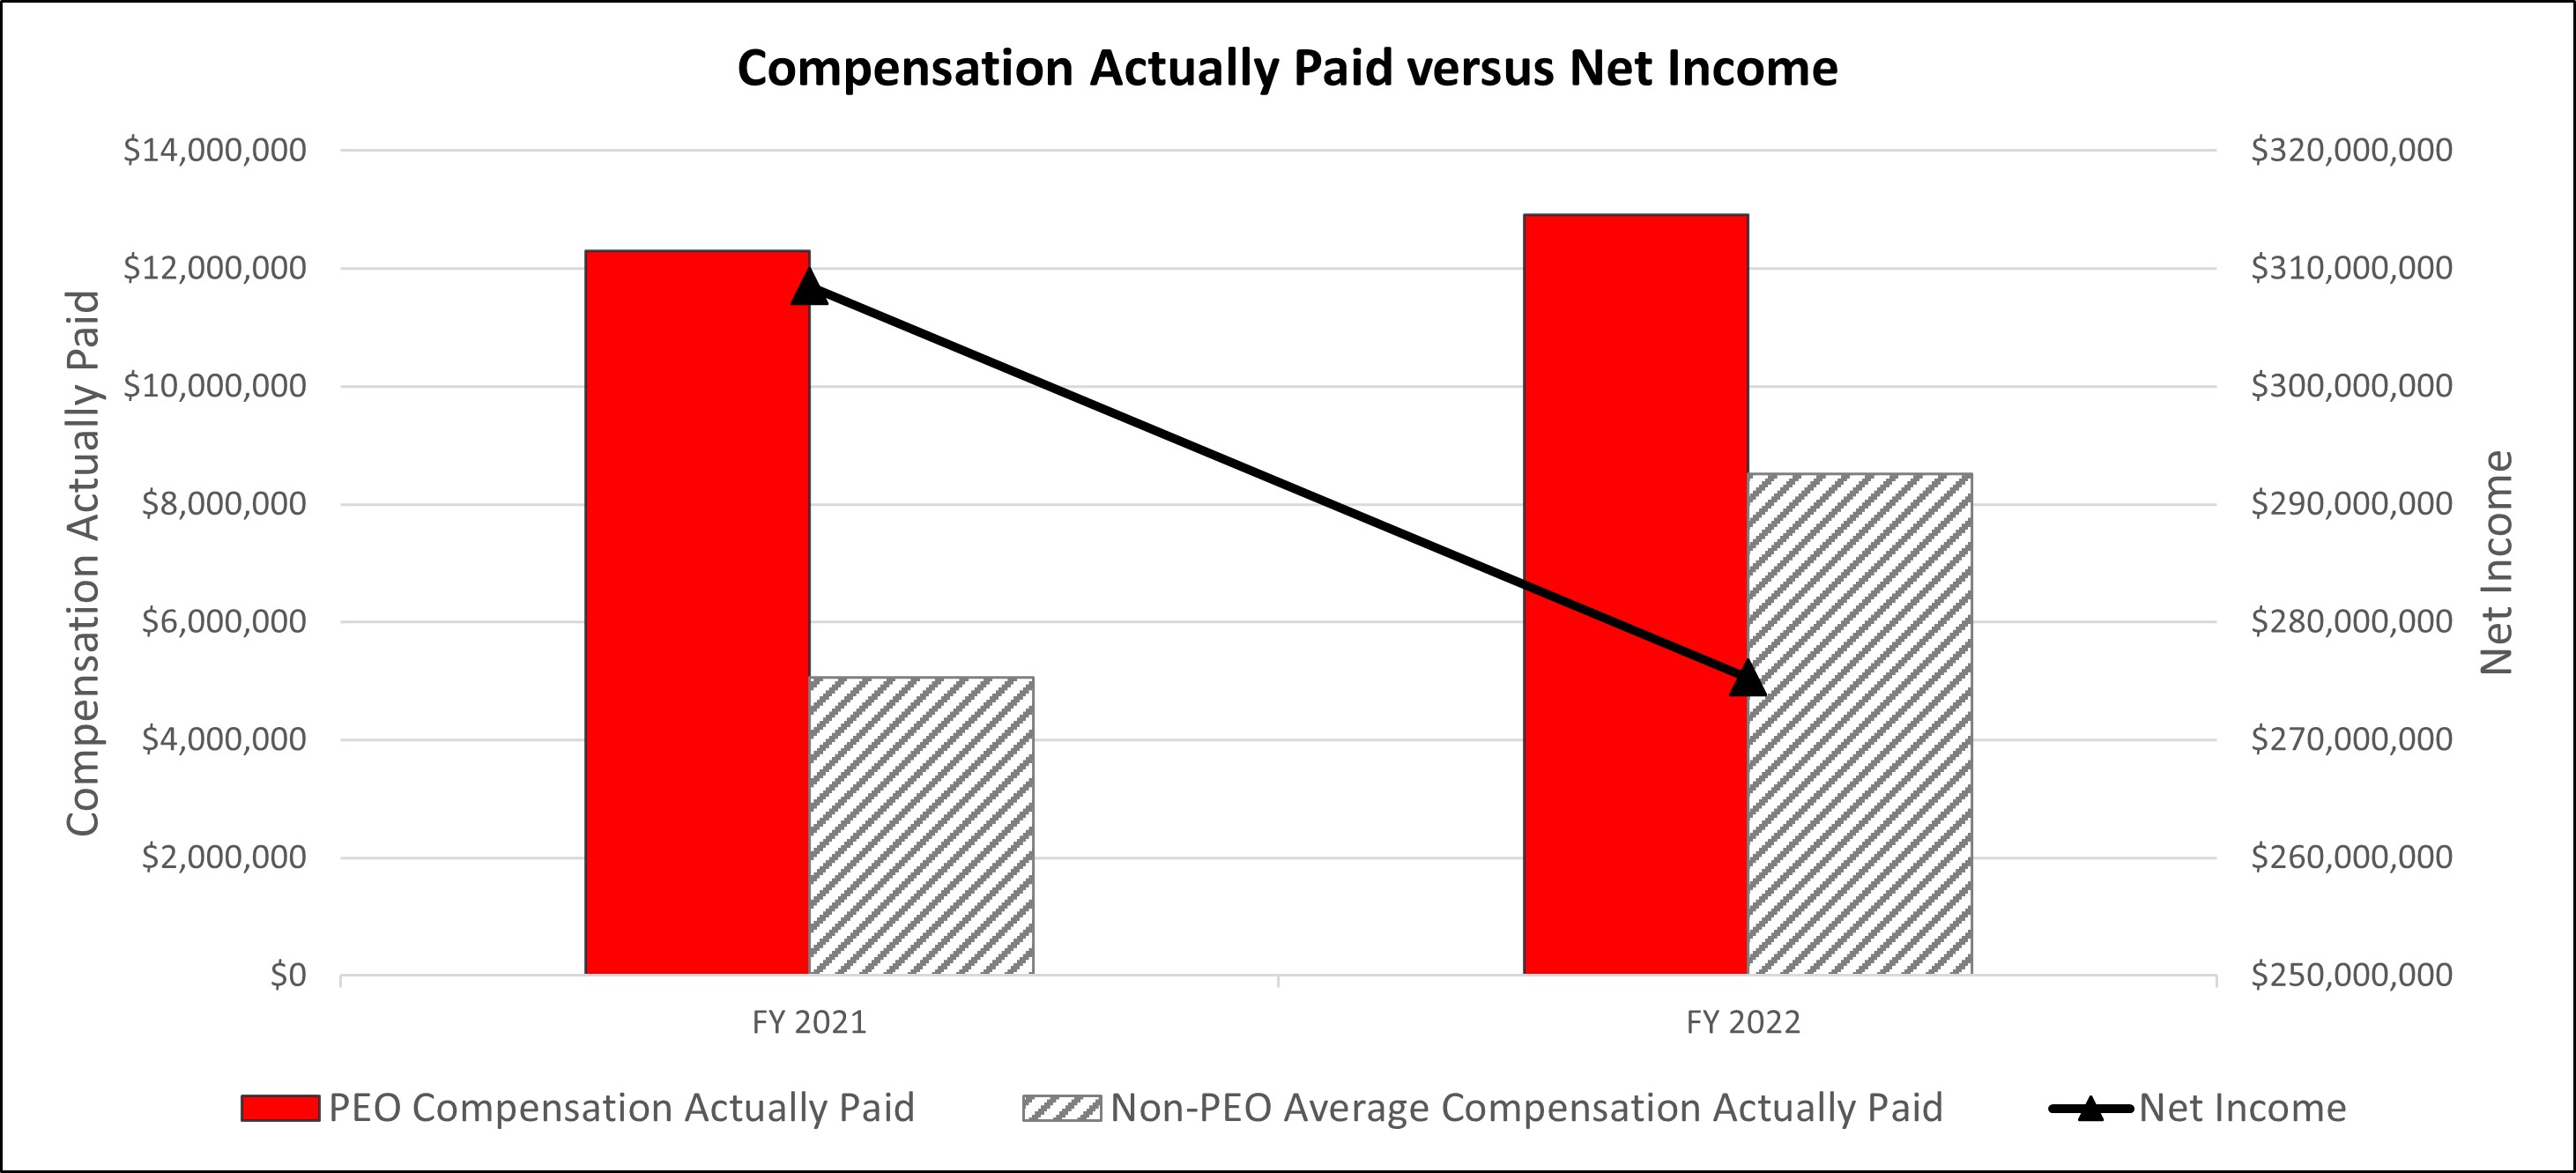 Comp Actually Paid versus Net Income1_1.jpg